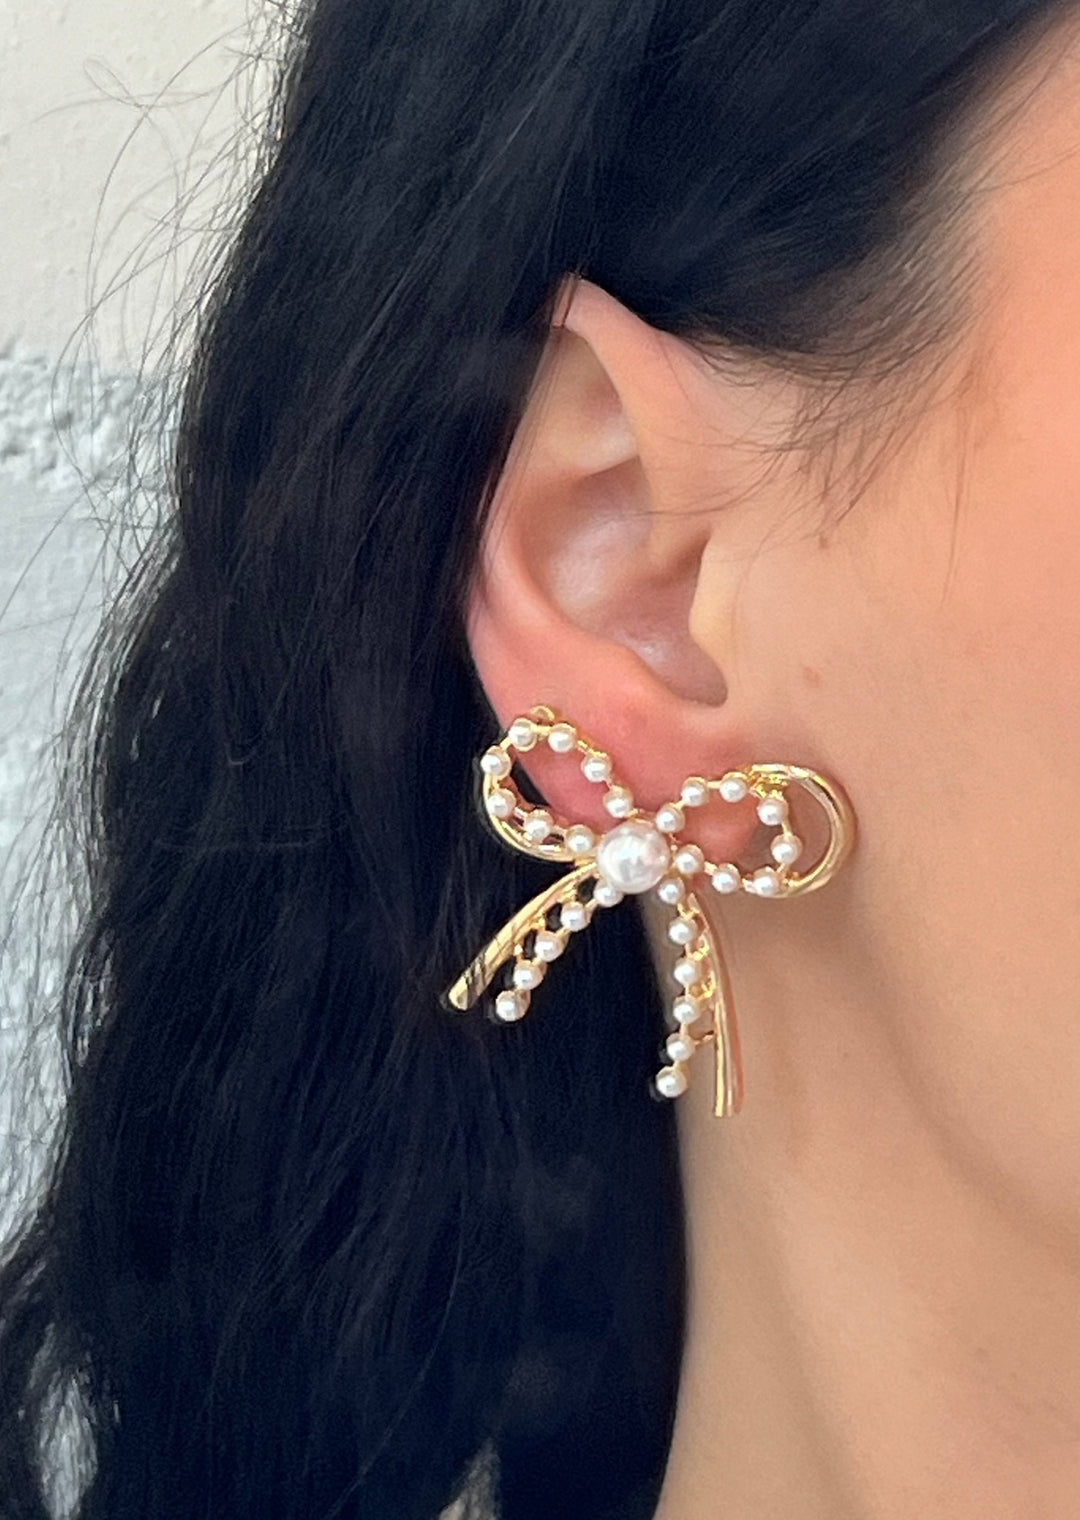 Girly Bow Earrings, Jewelry, Adeline, Adeline, dallas boutique, dallas texas, texas boutique, women's boutique dallas, adeline boutique, dallas boutique, trendy boutique, affordable boutique